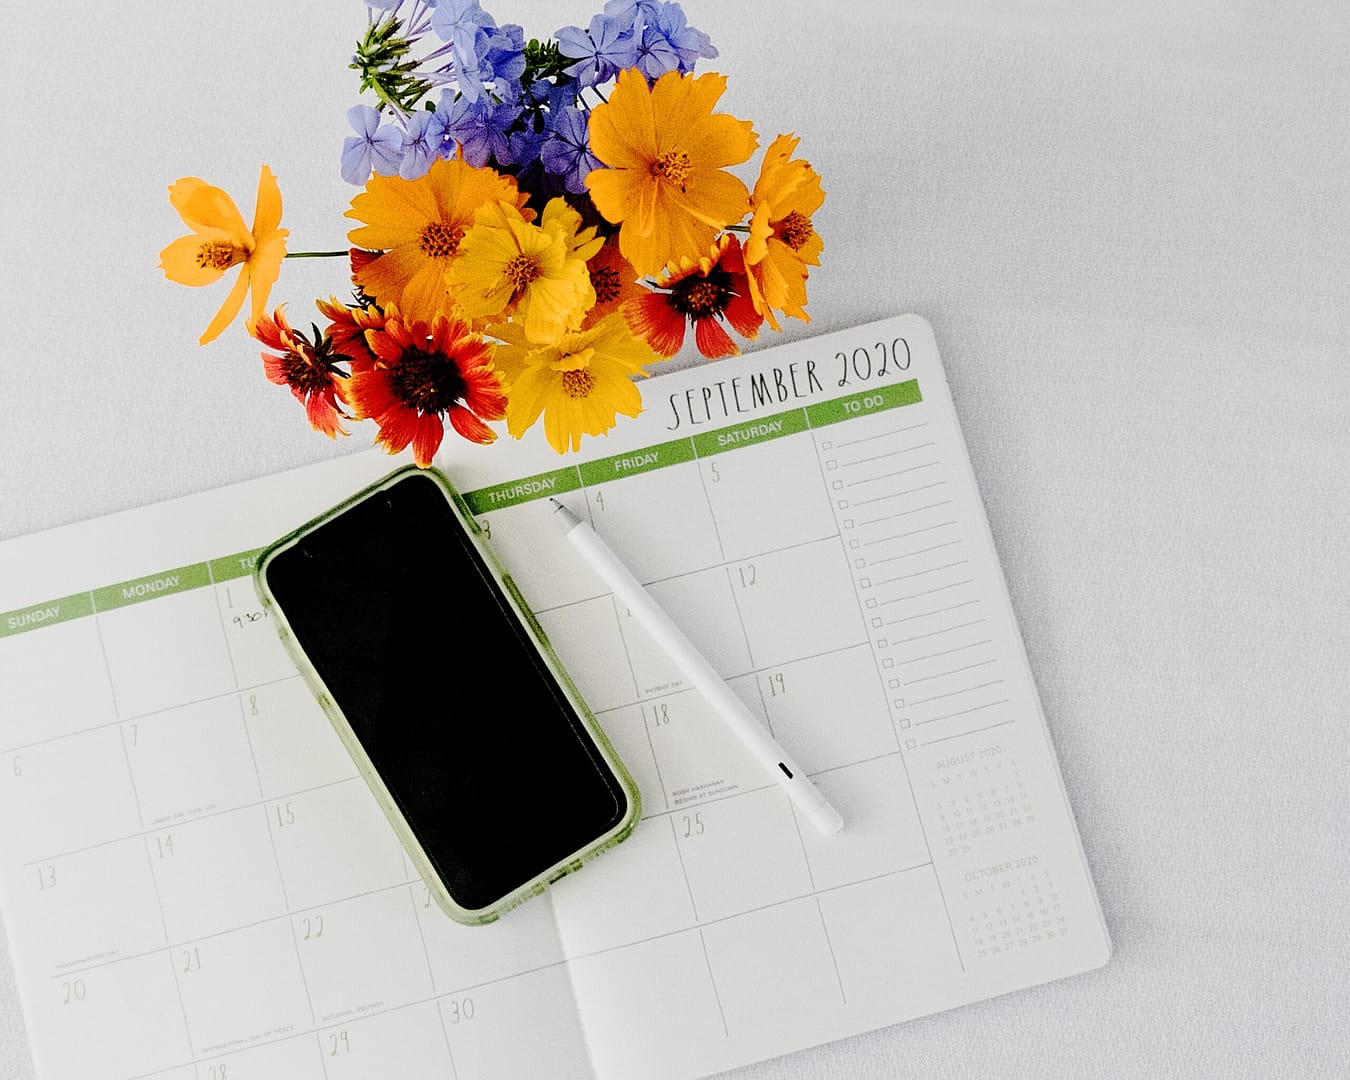 managing your time - phone on calendar next to flowers